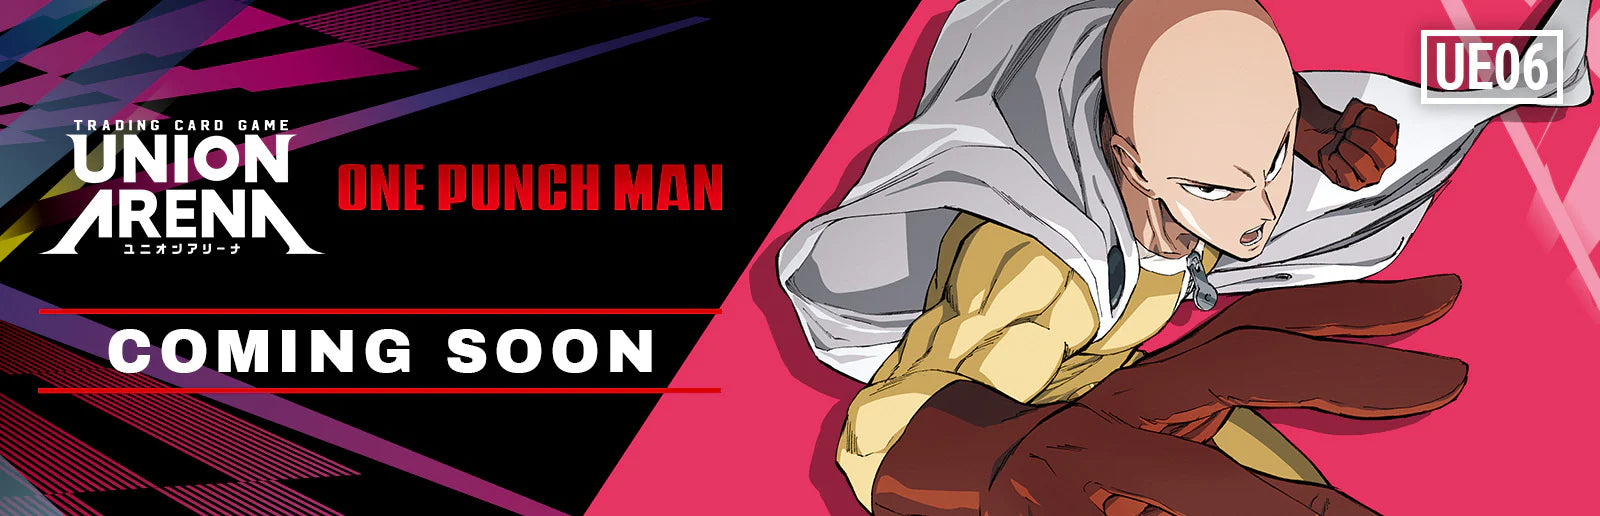 UNION ARENA - ONE PUNCH MAN BOOSTER BOX (PRE-ORDER) | Red Riot Games CA